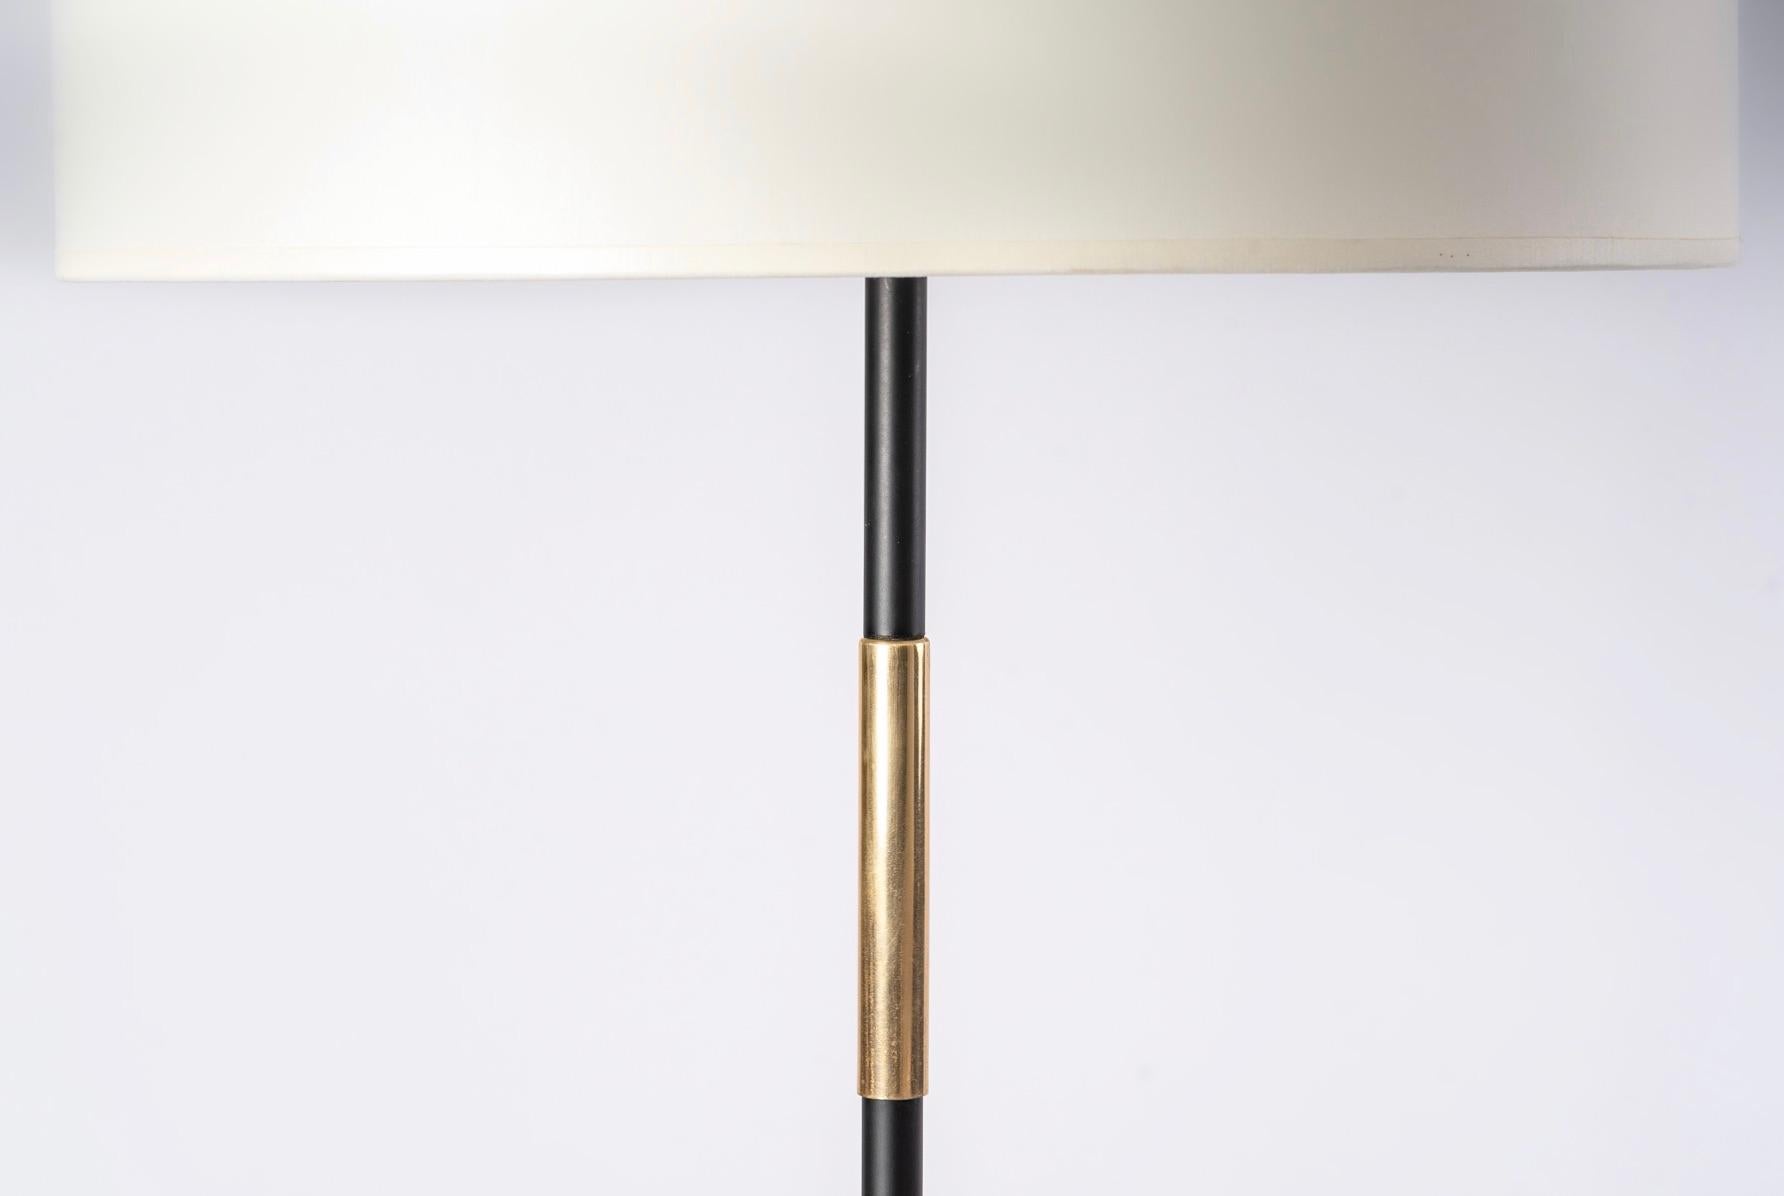 Floor lamp from Maison Lunel 1950

Composed of a central stem of round section in black wrought iron enhanced with golden brass on the upper part.
The floor lamp is placed on 3 pretty feet ending in small round discs.
The base of the foot is